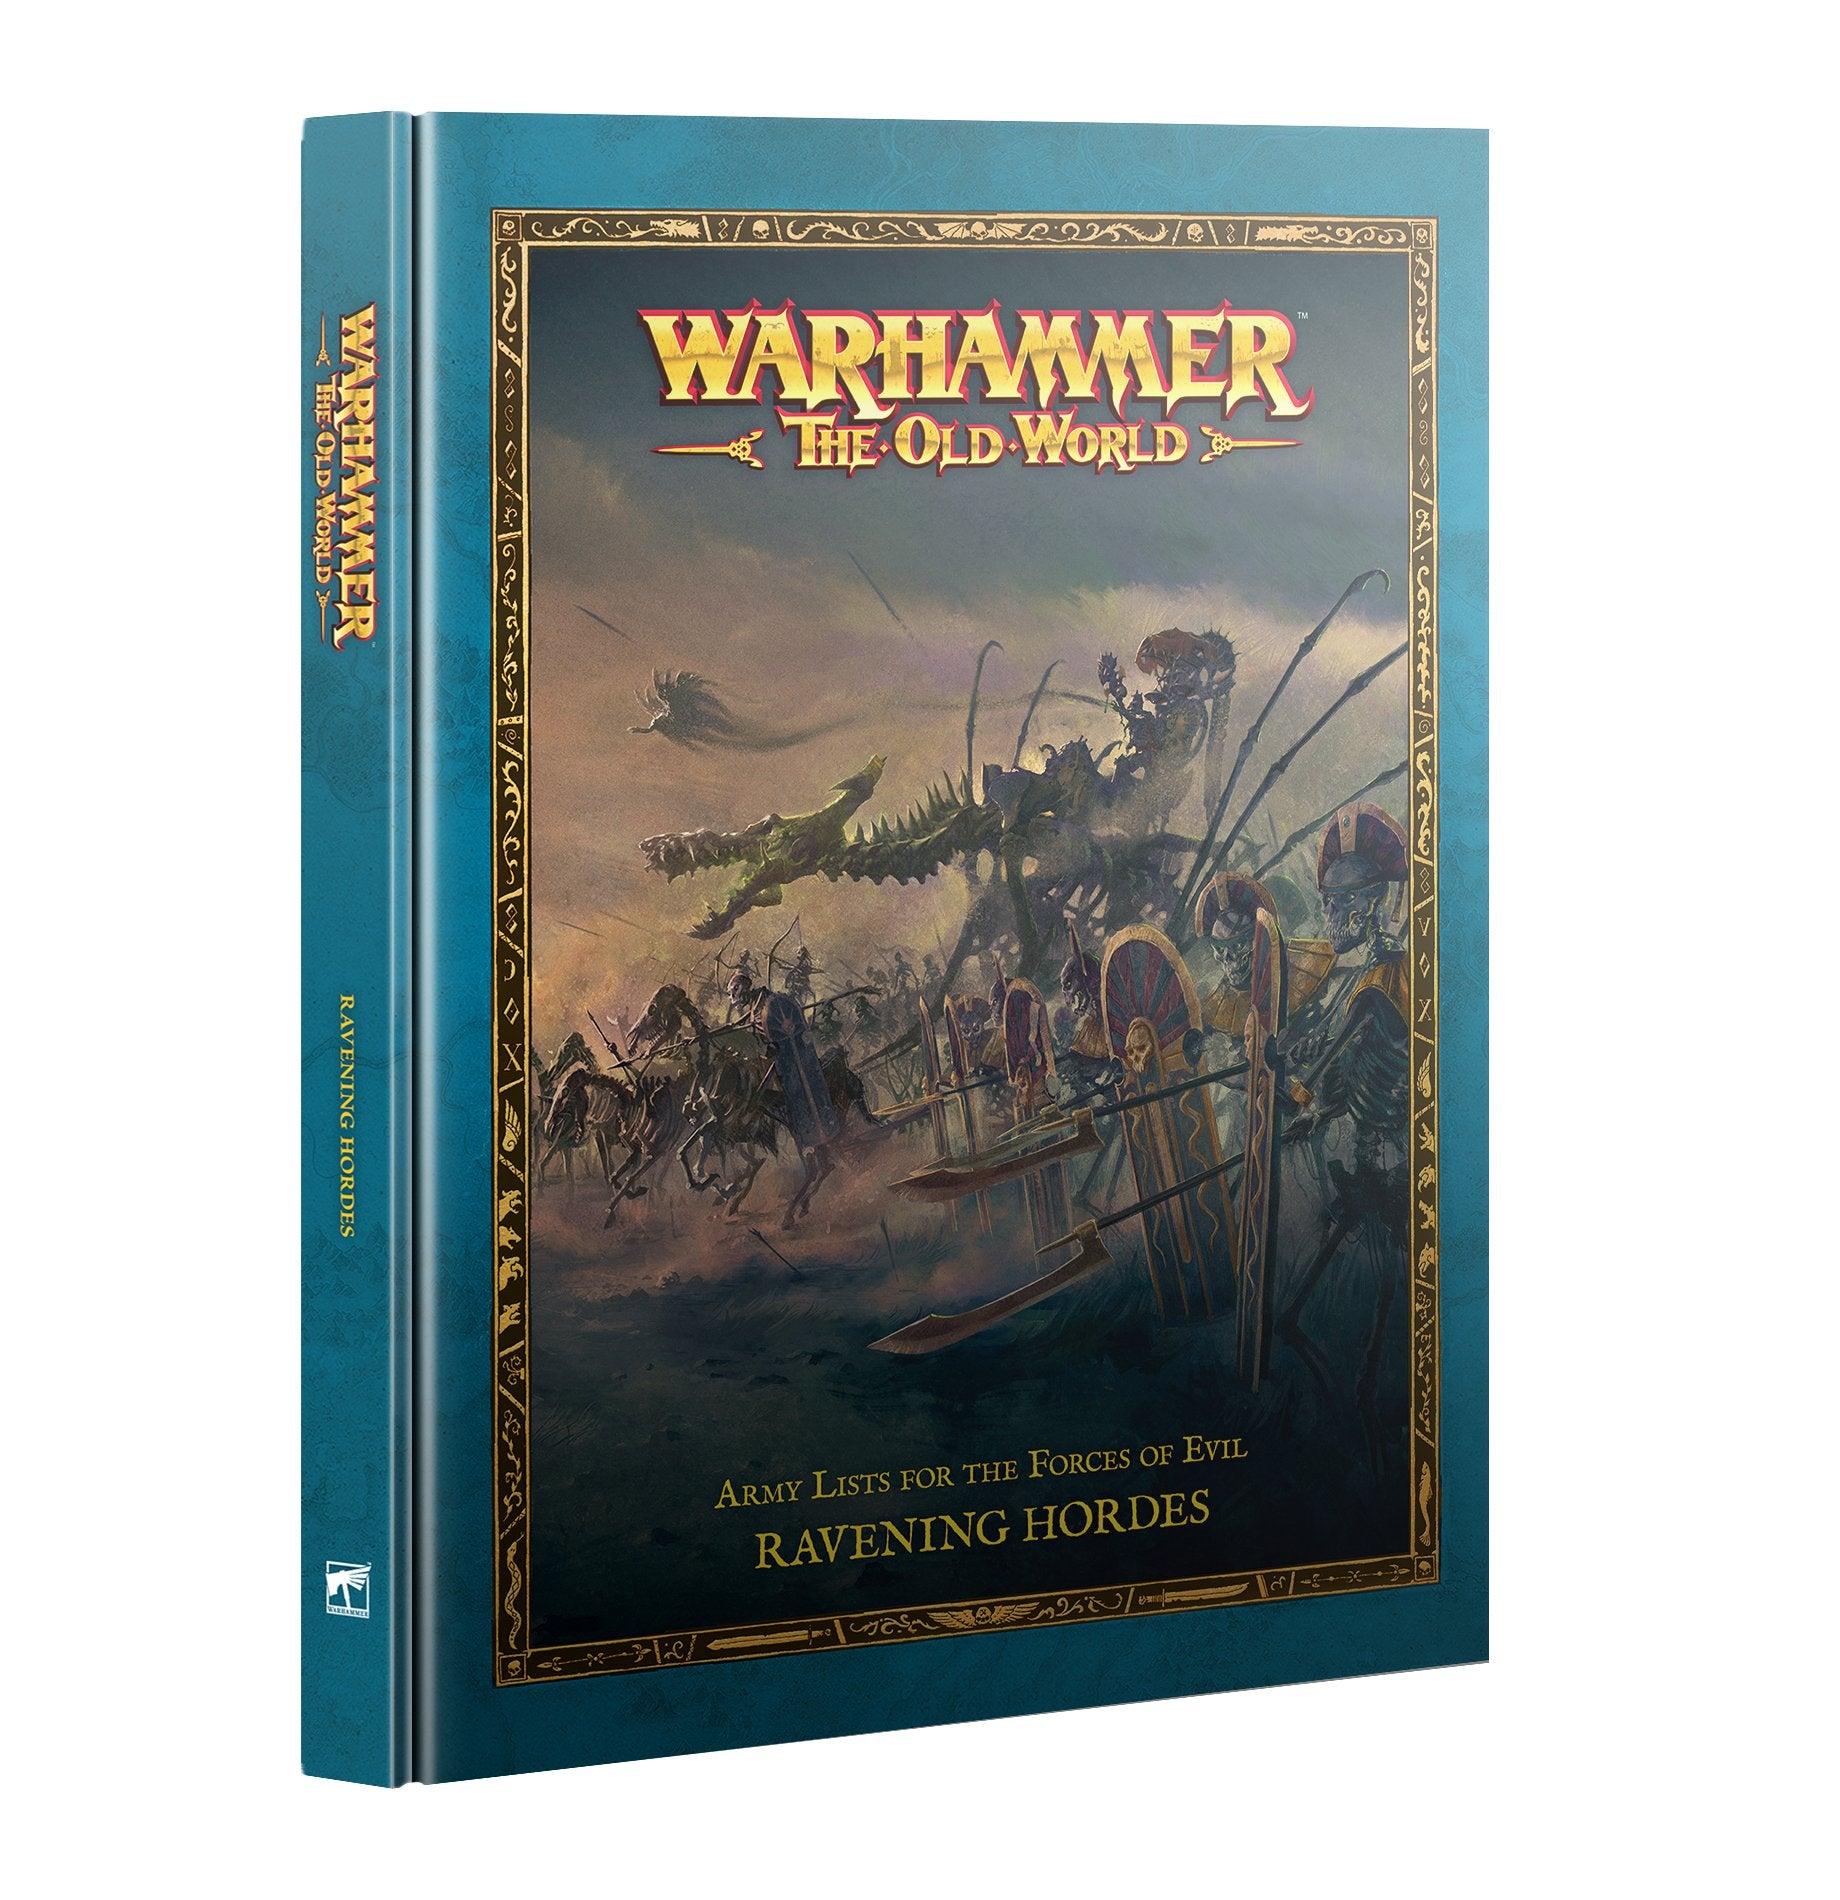 Warhammer The Old World: Army Lists for the Forces of Evil - Ravening Hordes